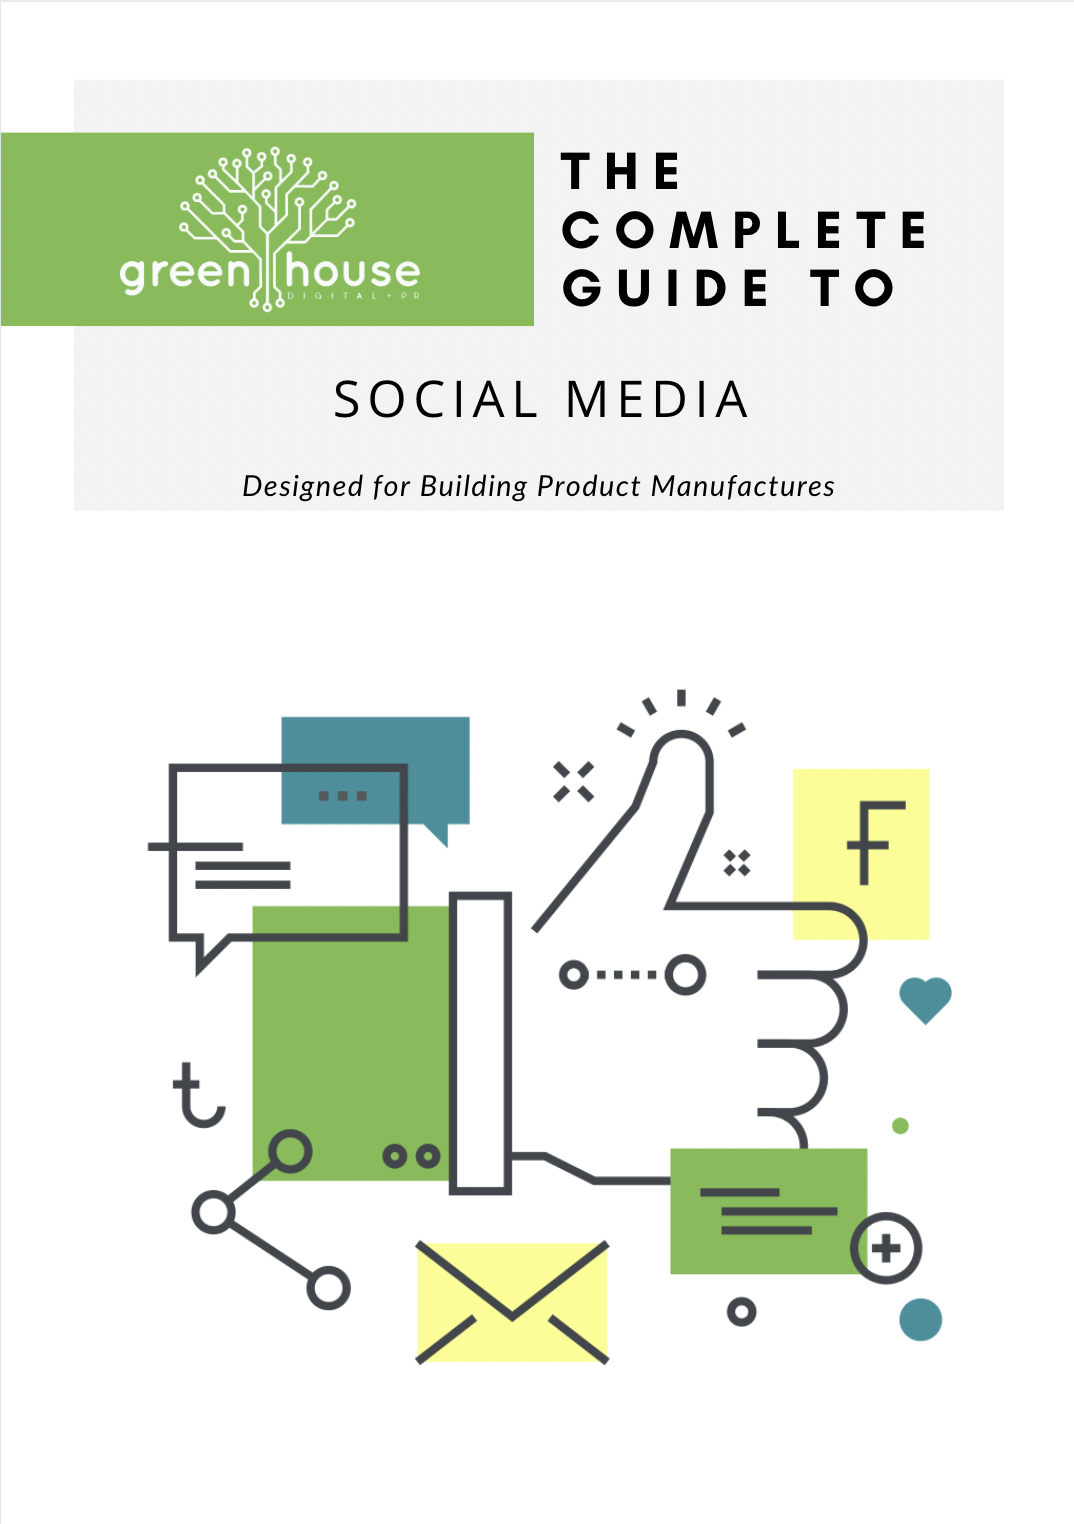 The Complete Guide to Social Media